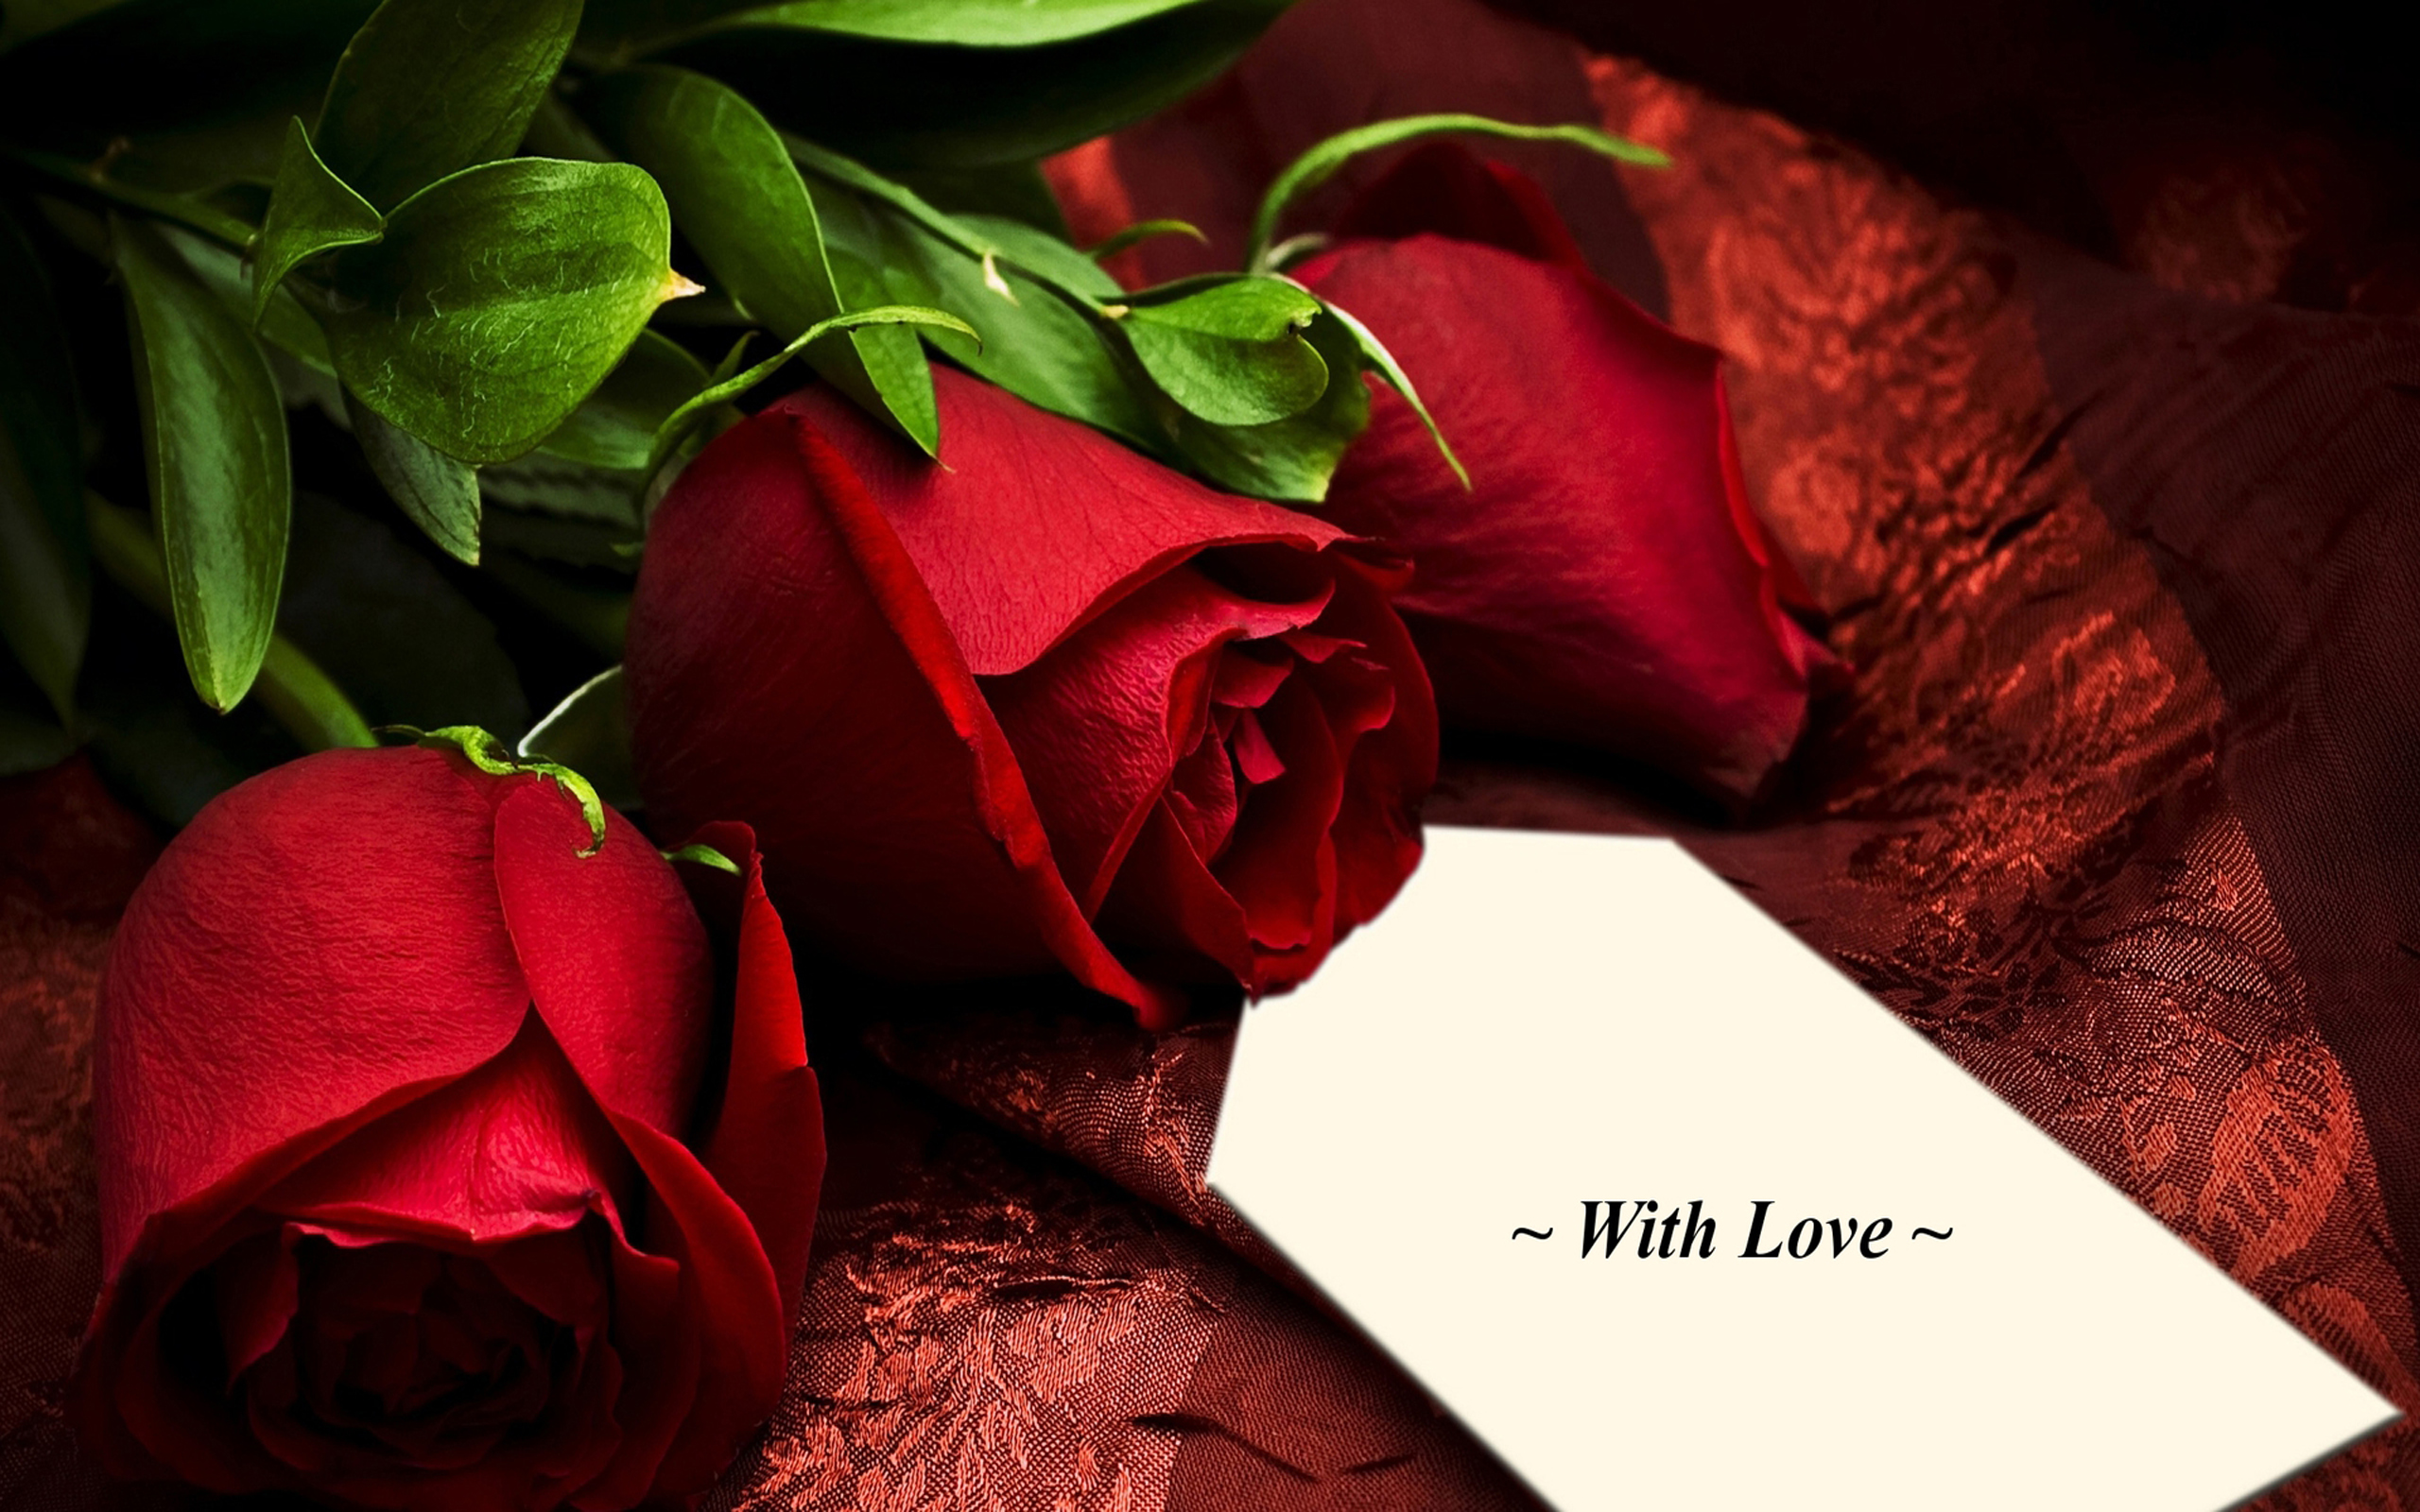 Romance Pretty Red Roses Romantic Rose With Love 1937404 : Wallpapers13.com